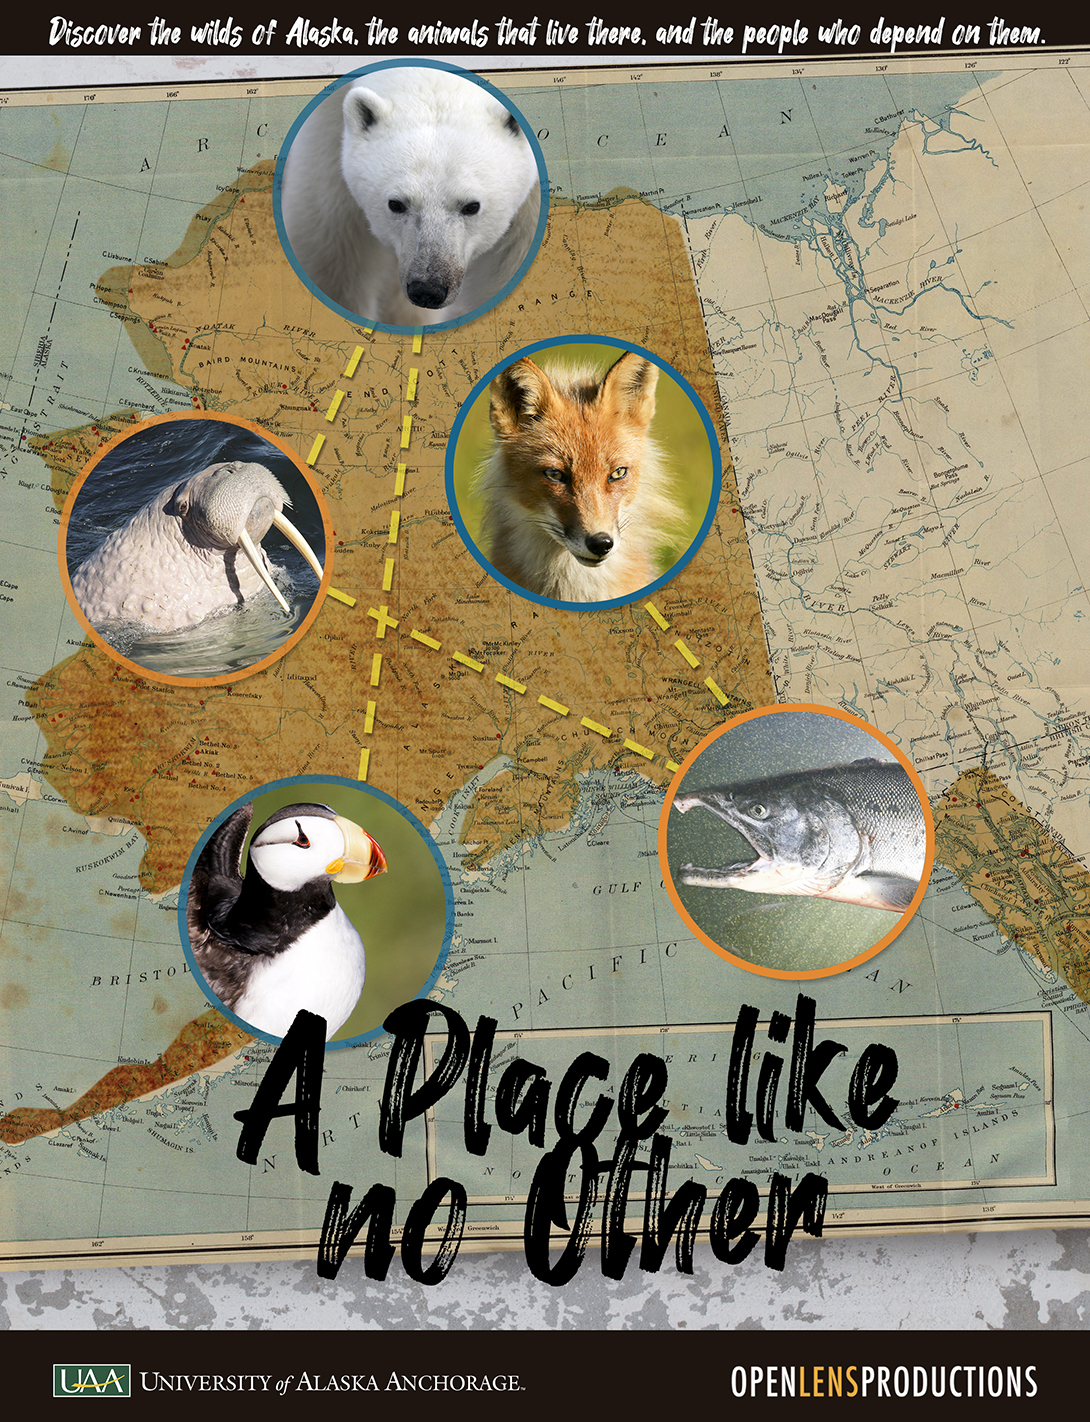 Poster for A Place Like No Other. Discover the wilds of Alaska, the animals that live there, and the people who depend on them. University of Alaska Anchorage. Open Lens Production.